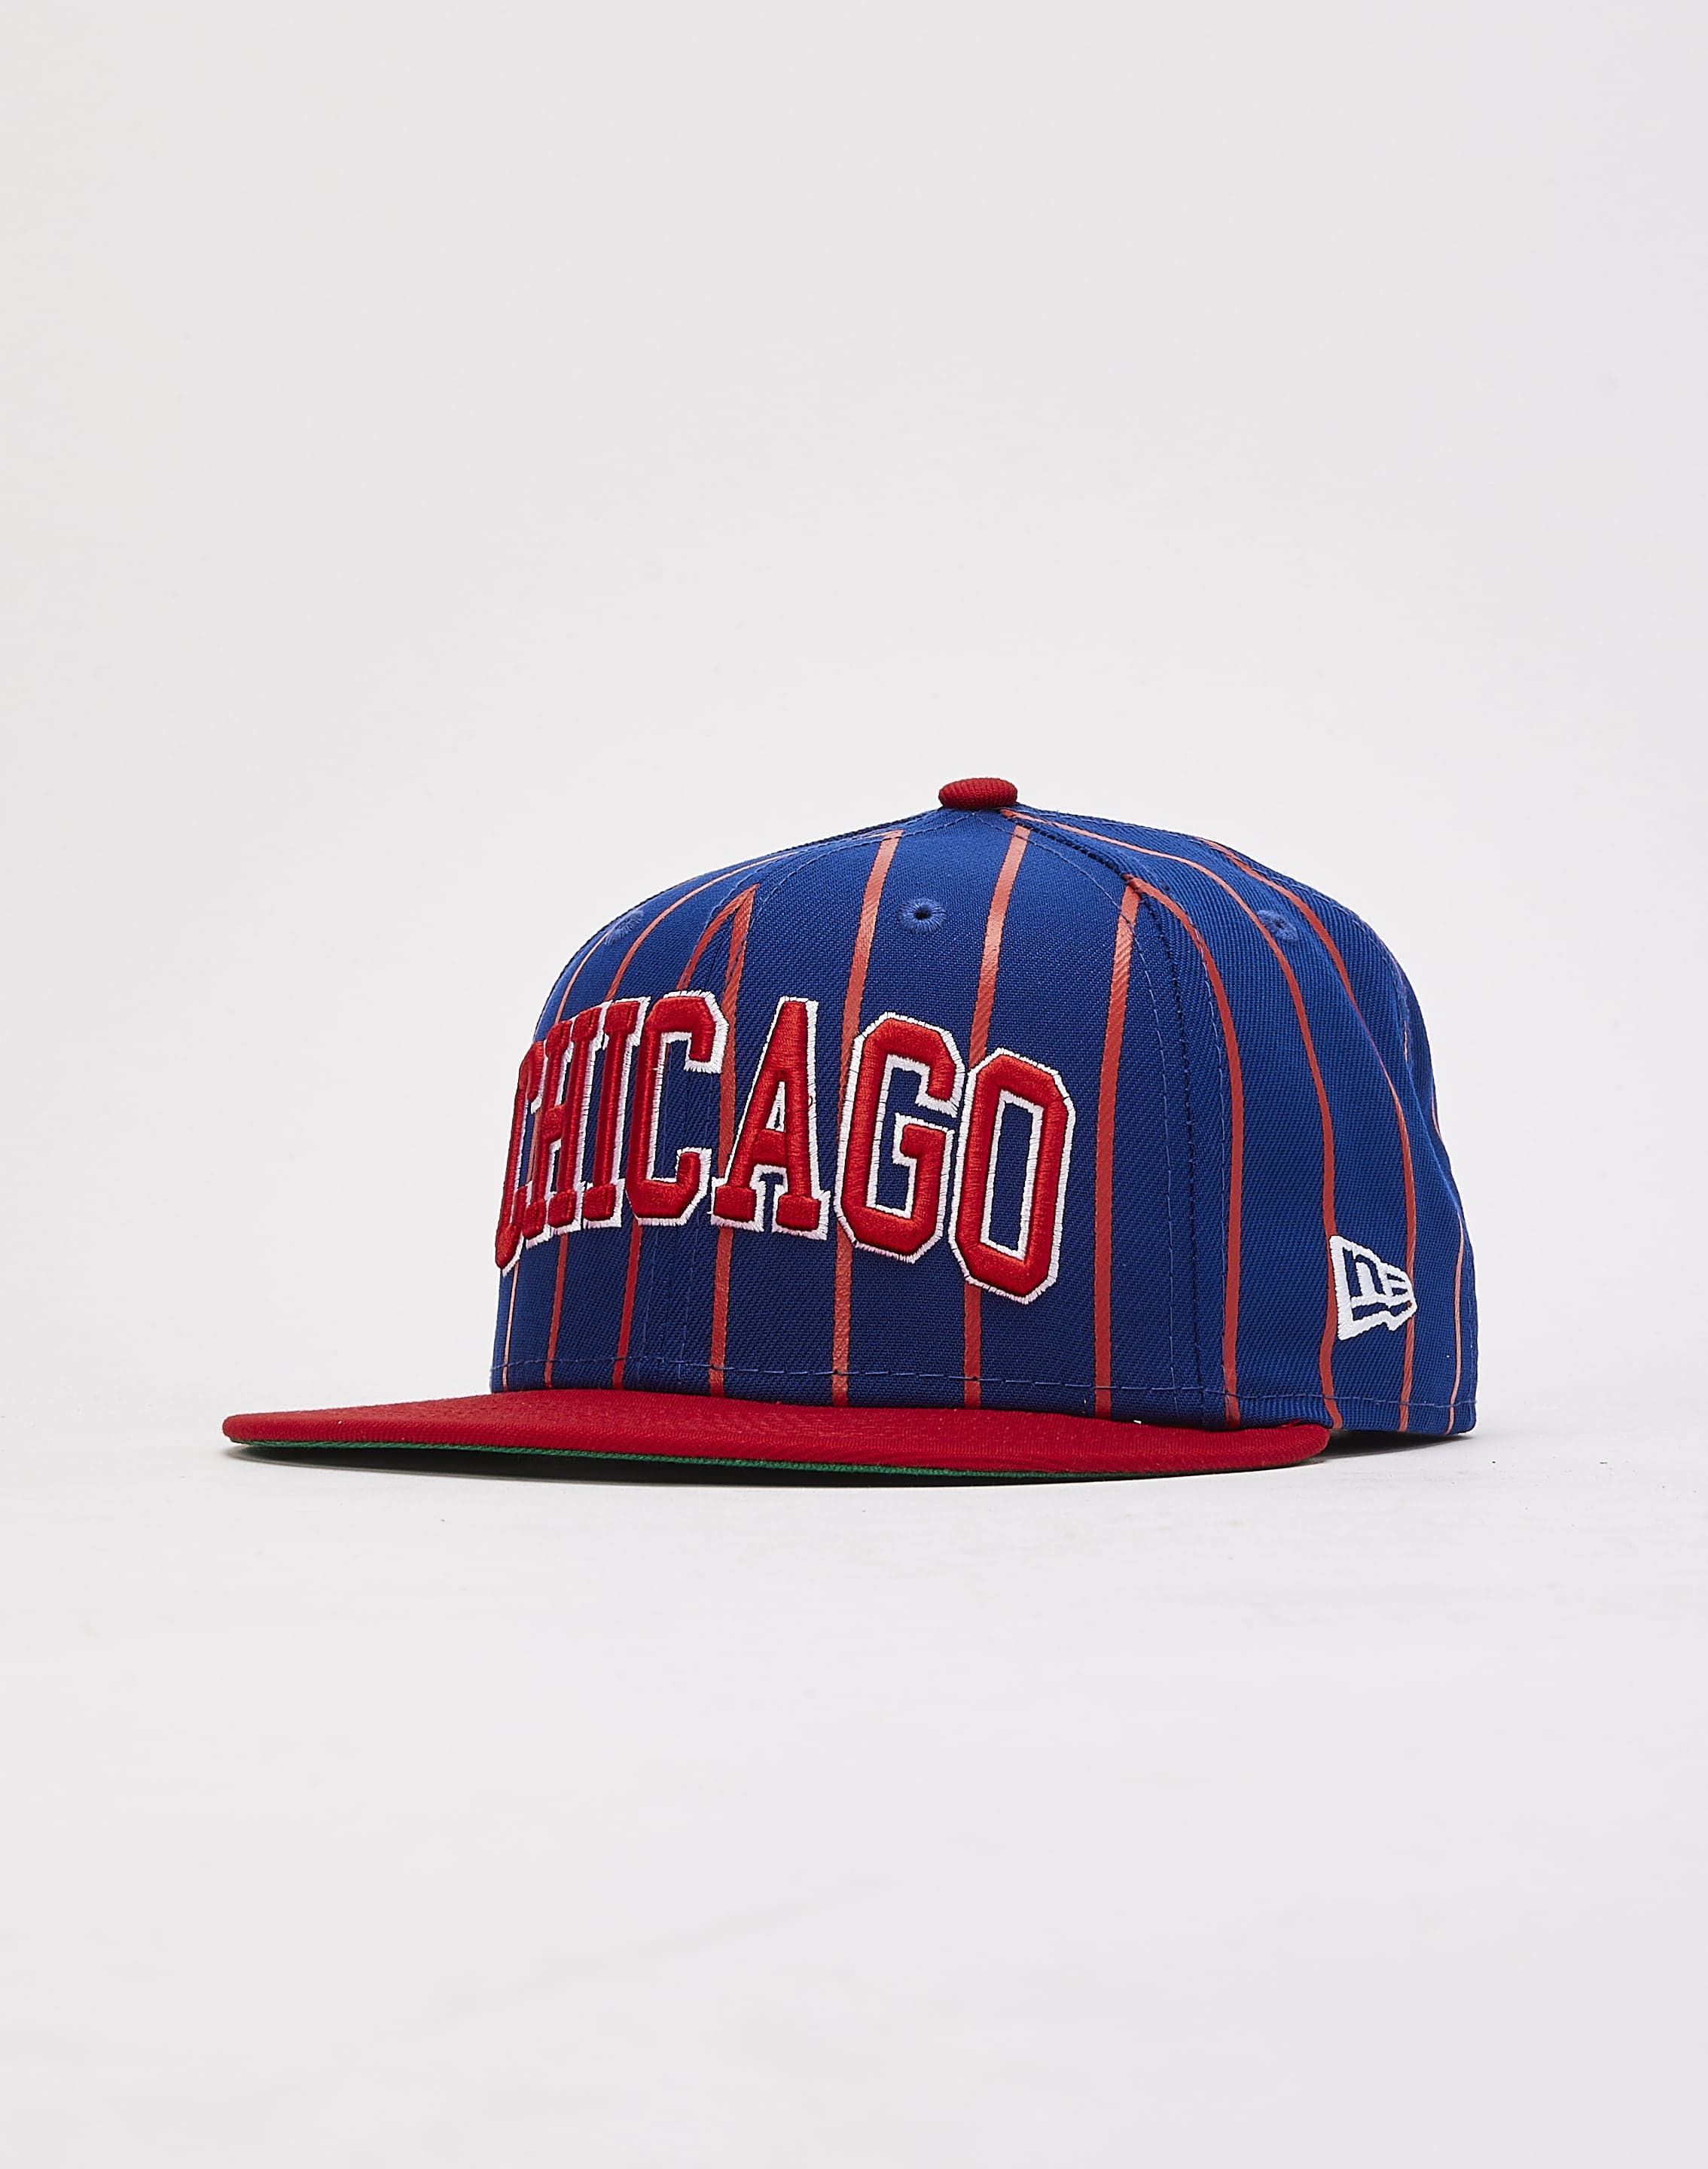 New Era MLB Chicago Cubs Genuine 9FIFTY Snapback Gold Stitch Hat Cap w patch